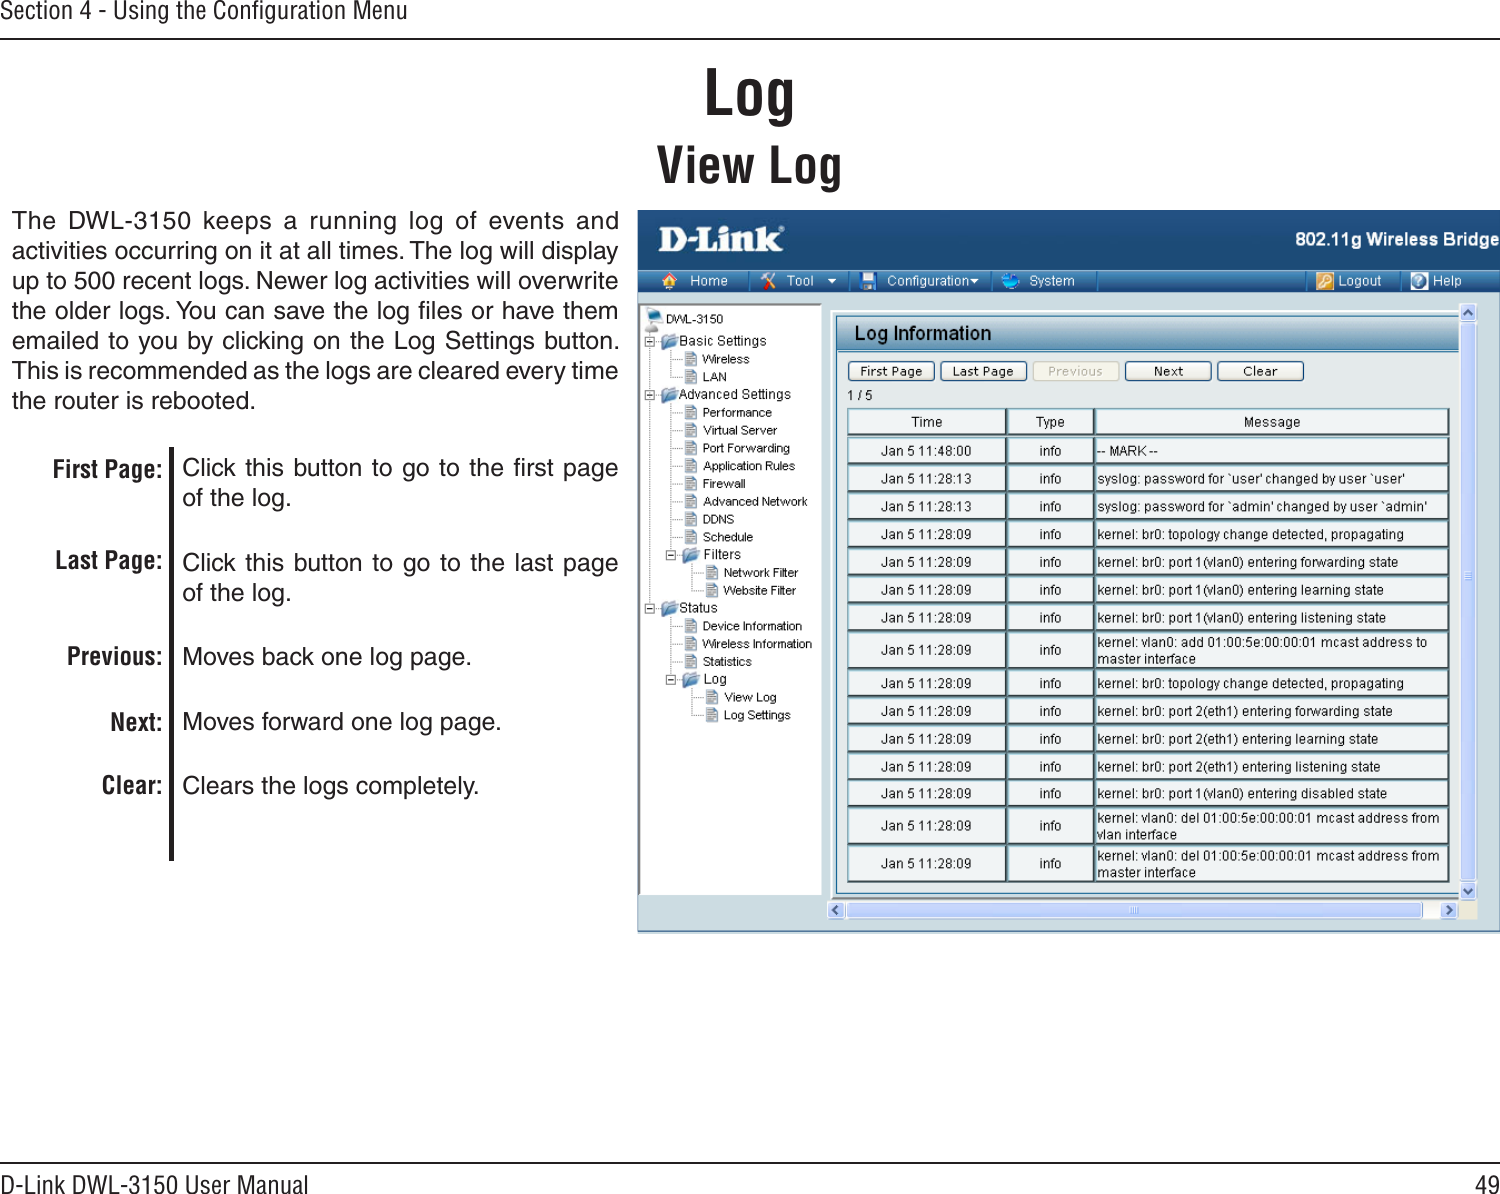 49D-Link DWL-3150 User ManualSection 4 - Using the Conﬁguration MenuLogView LogThe  DWL-3150  keeps  a  running  log  of  events  and activities occurring on it at all times. The log will display up to 500 recent logs. Newer log activities will overwrite the older logs. You can save the log ﬁles or have them emailed to you by clicking on the Log Settings button. This is recommended as the logs are cleared every time the router is rebooted. Click this button to go to the ﬁrst page of the log. Click this button  to go to the last page of the log. Moves back one log page. Moves forward one log page.Clears the logs completely.First Page:Last Page:Previous:Next:Clear: